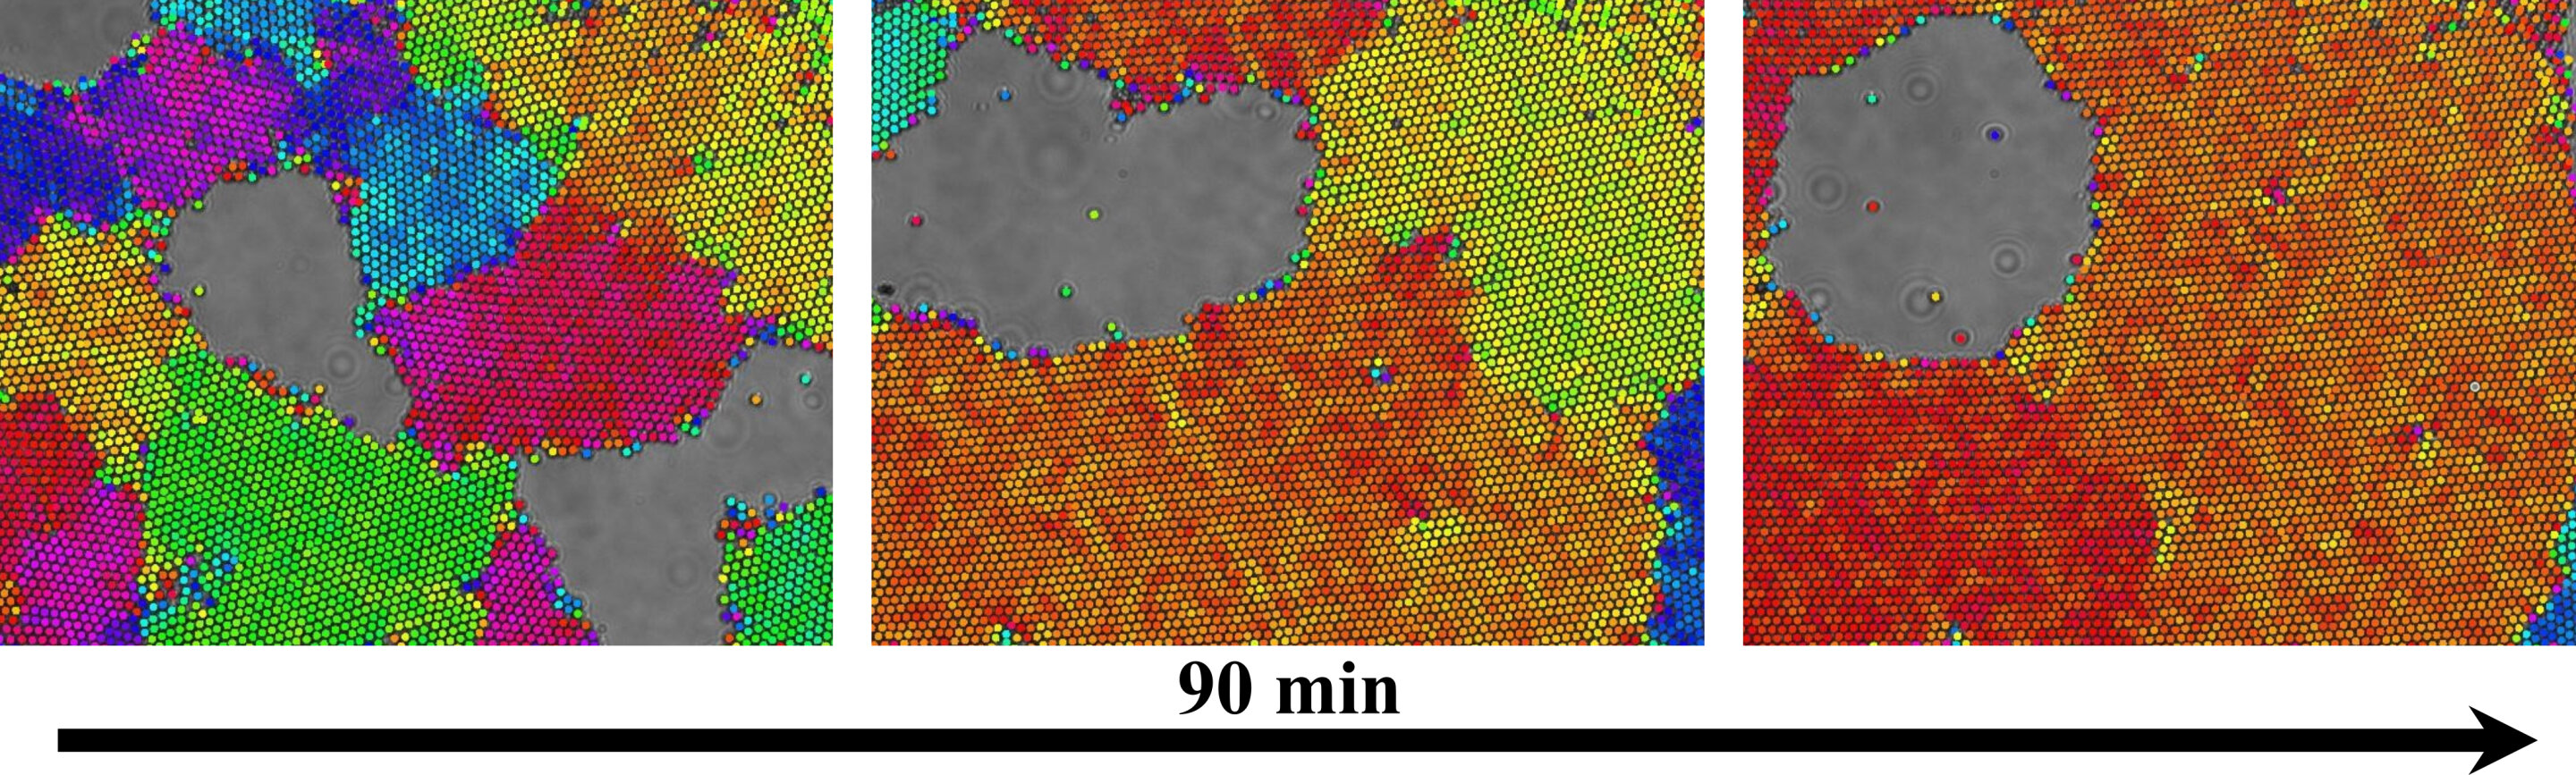 Engineers model nanoscale crystal dynamics in easy-to-view system